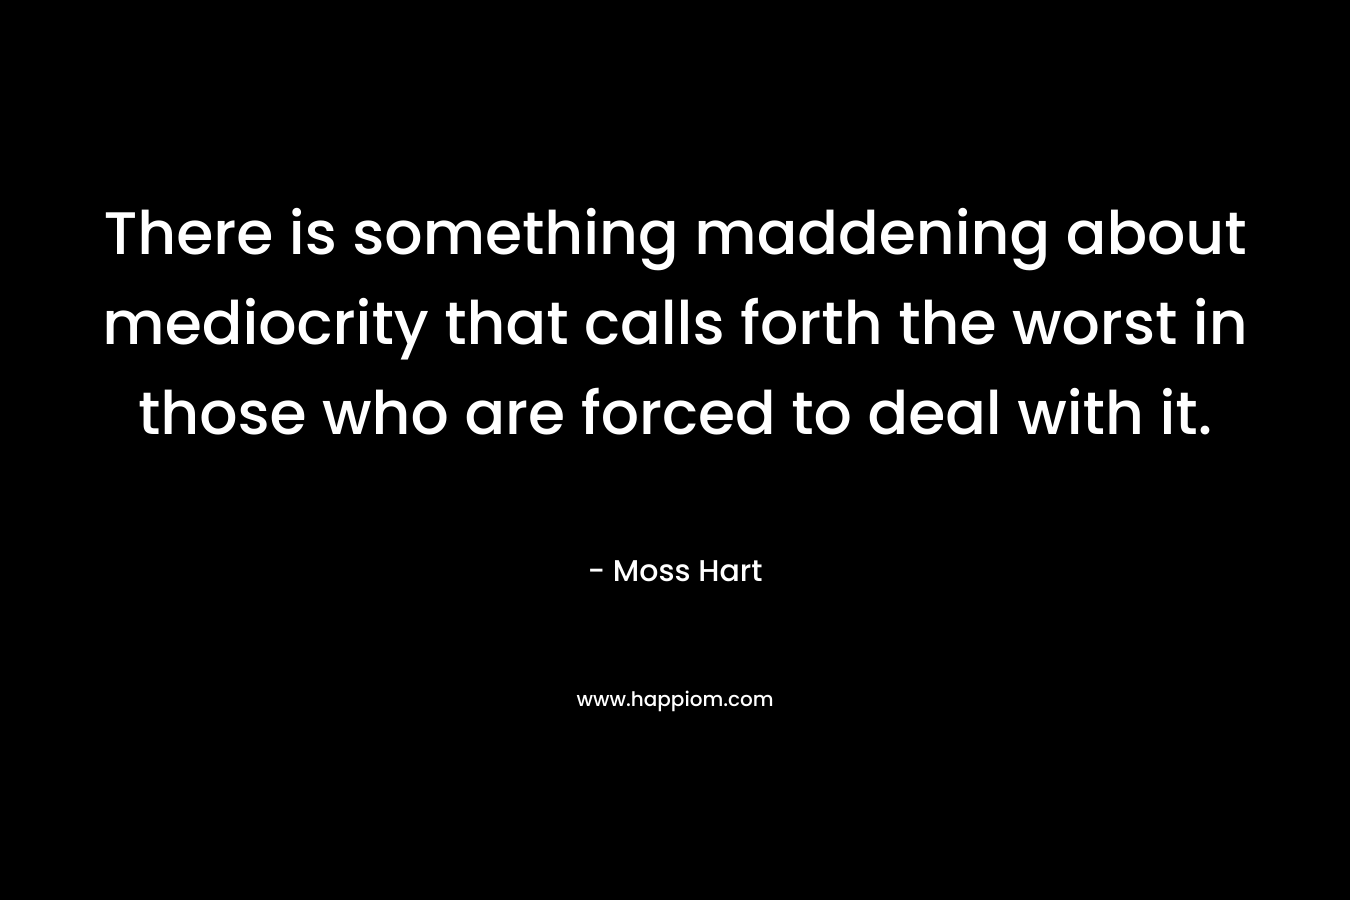 There is something maddening about mediocrity that calls forth the worst in those who are forced to deal with it. – Moss Hart